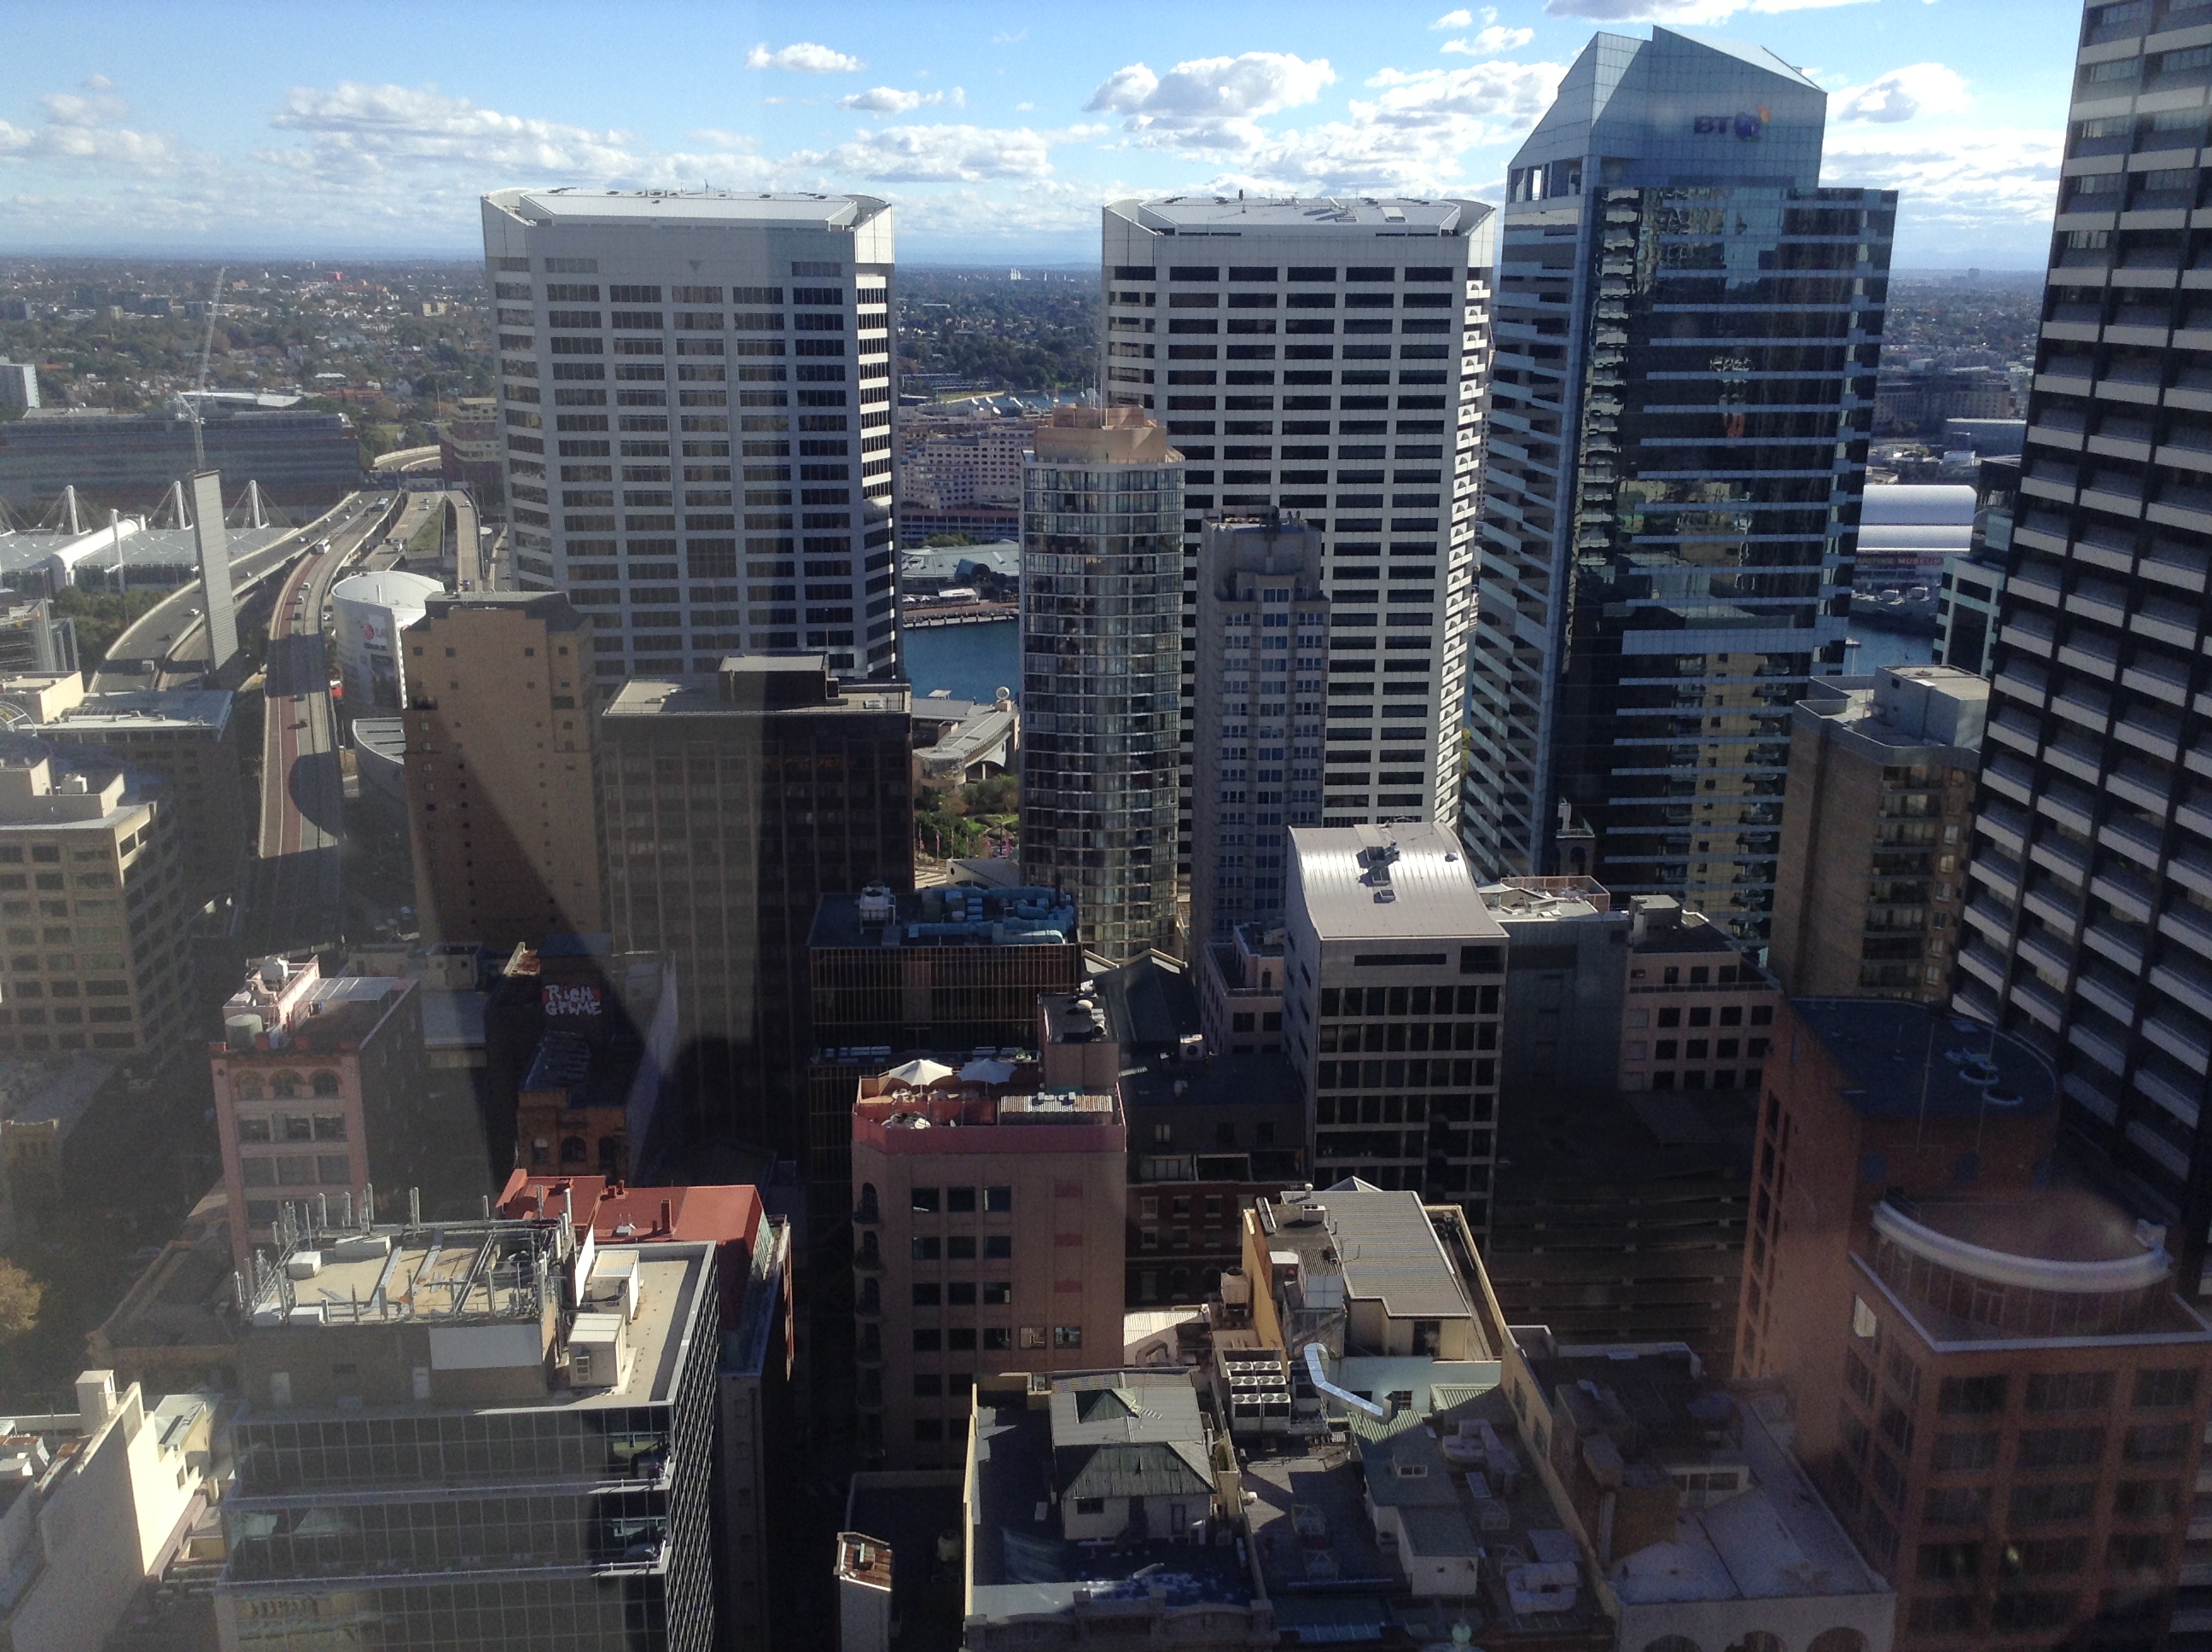 Looking west across Sydney from a 36th floor downtown